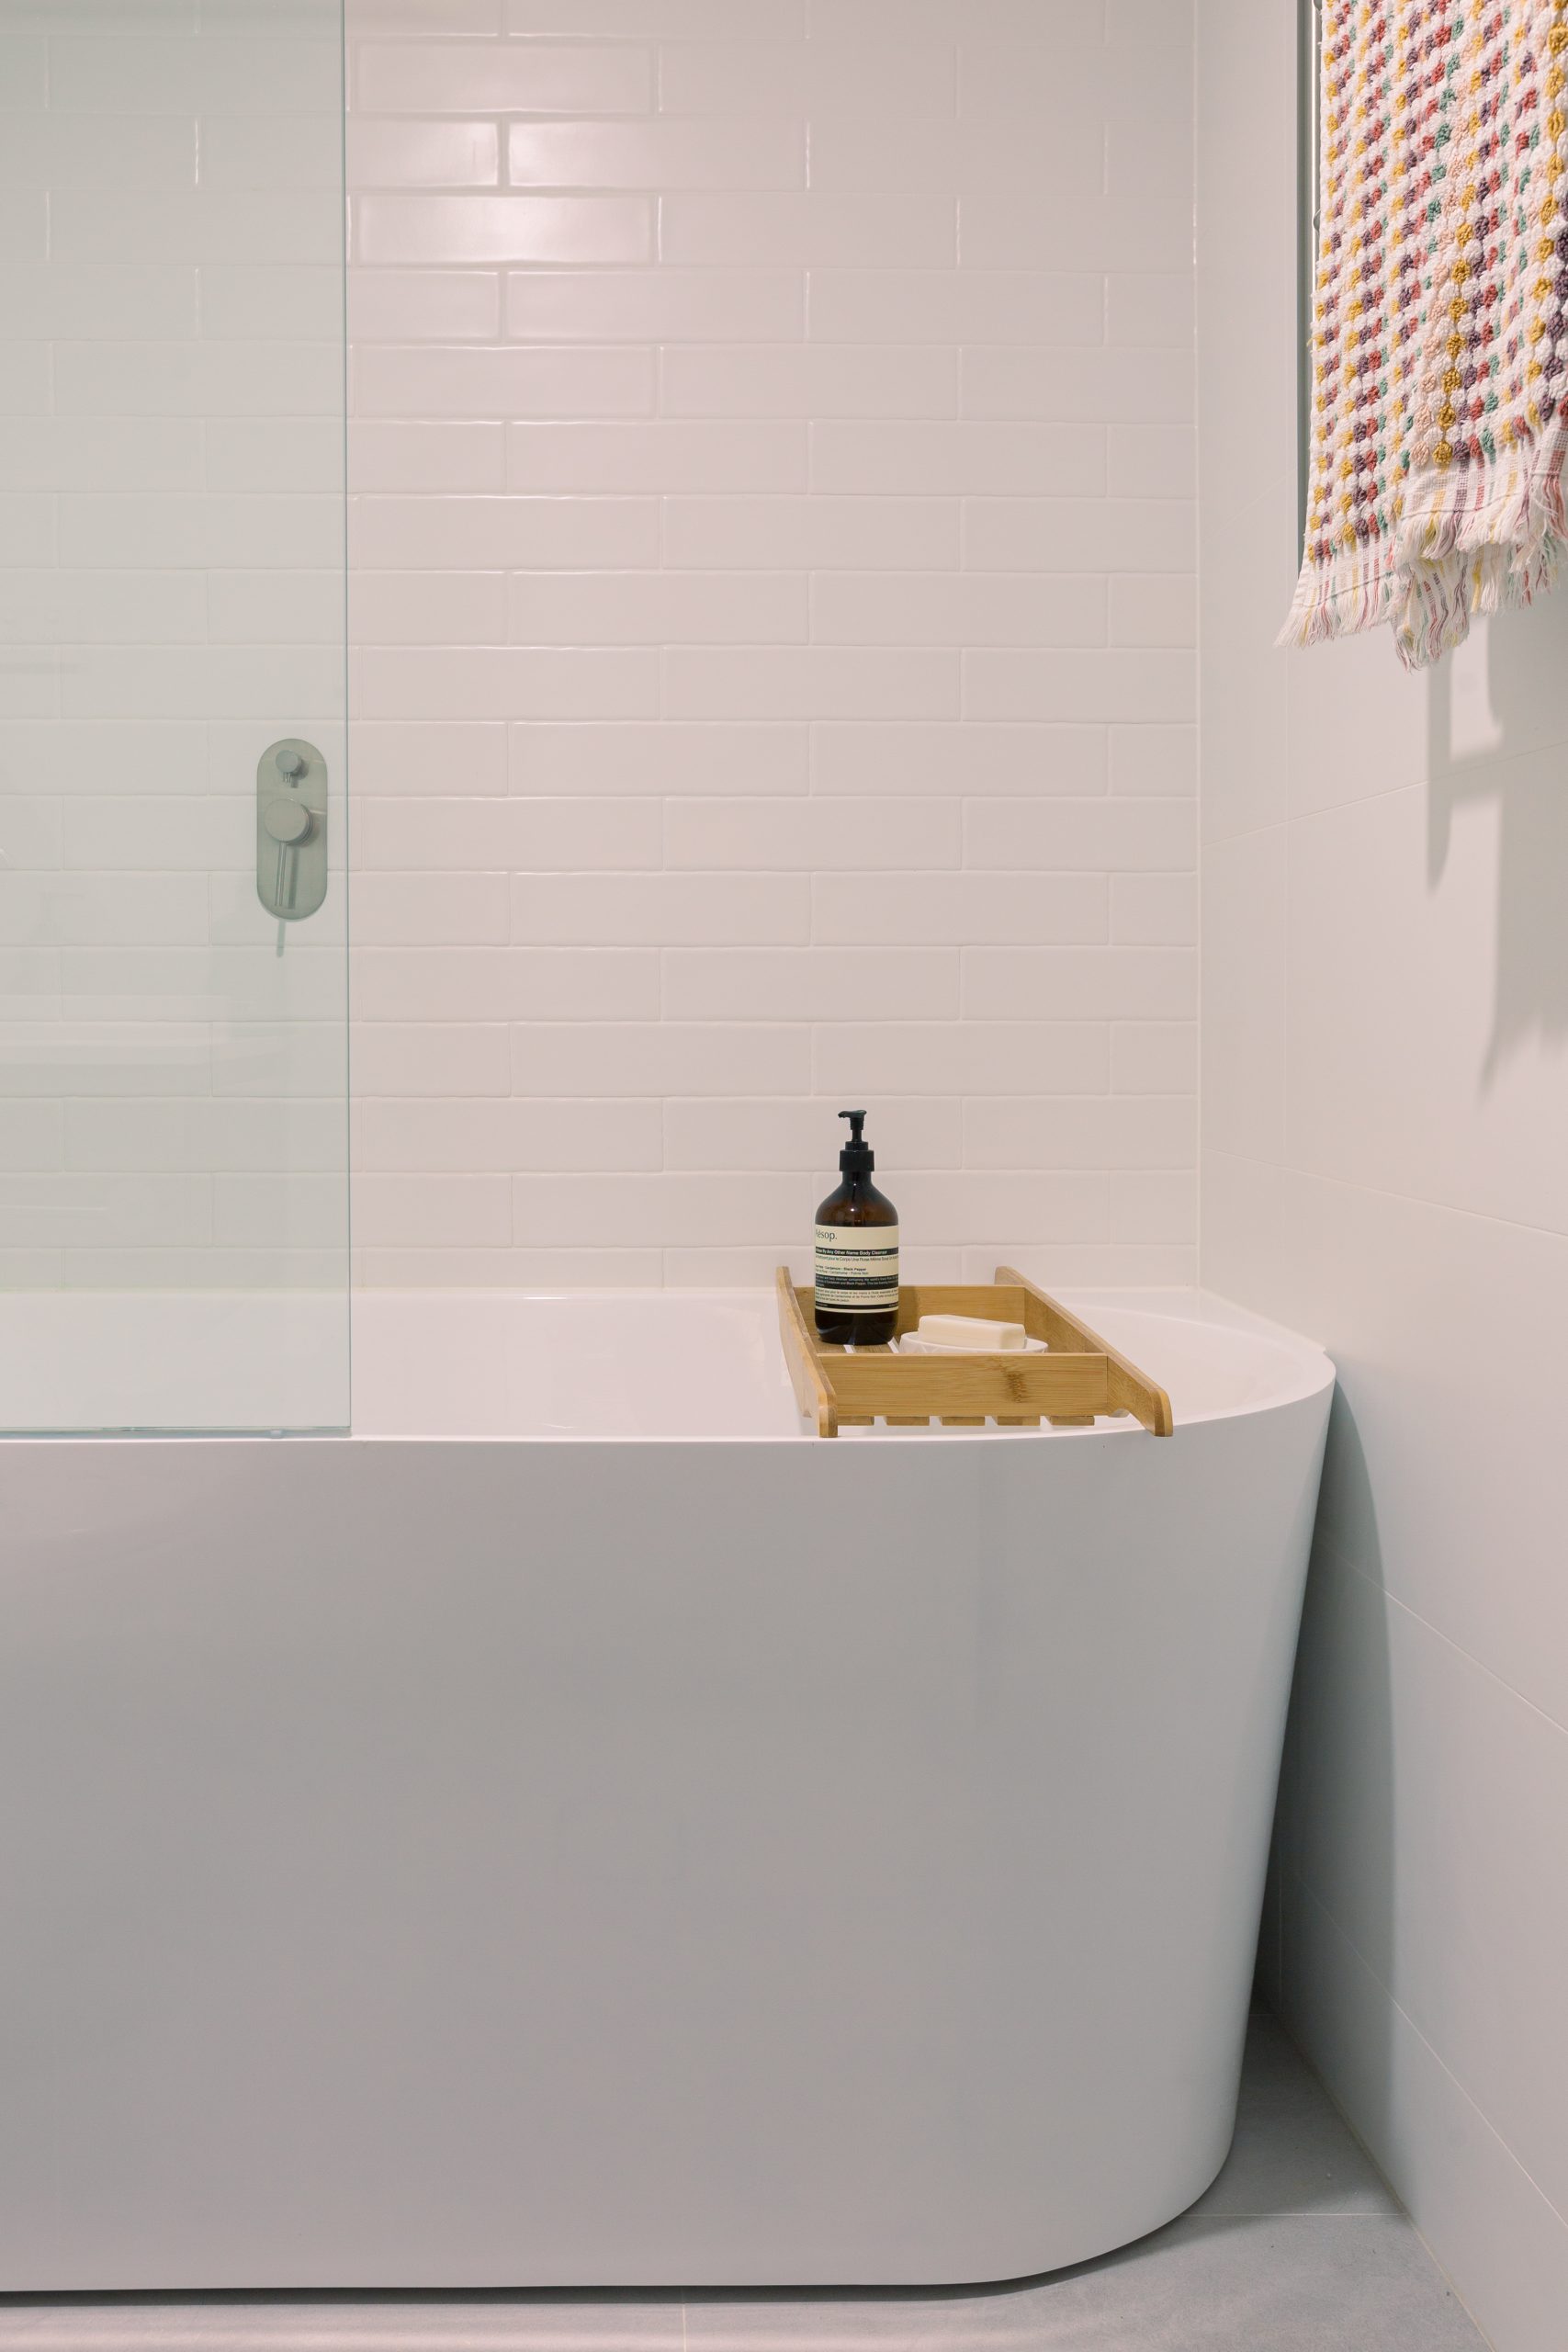 How Frequently Should You Make Changes to Your Bathroom?